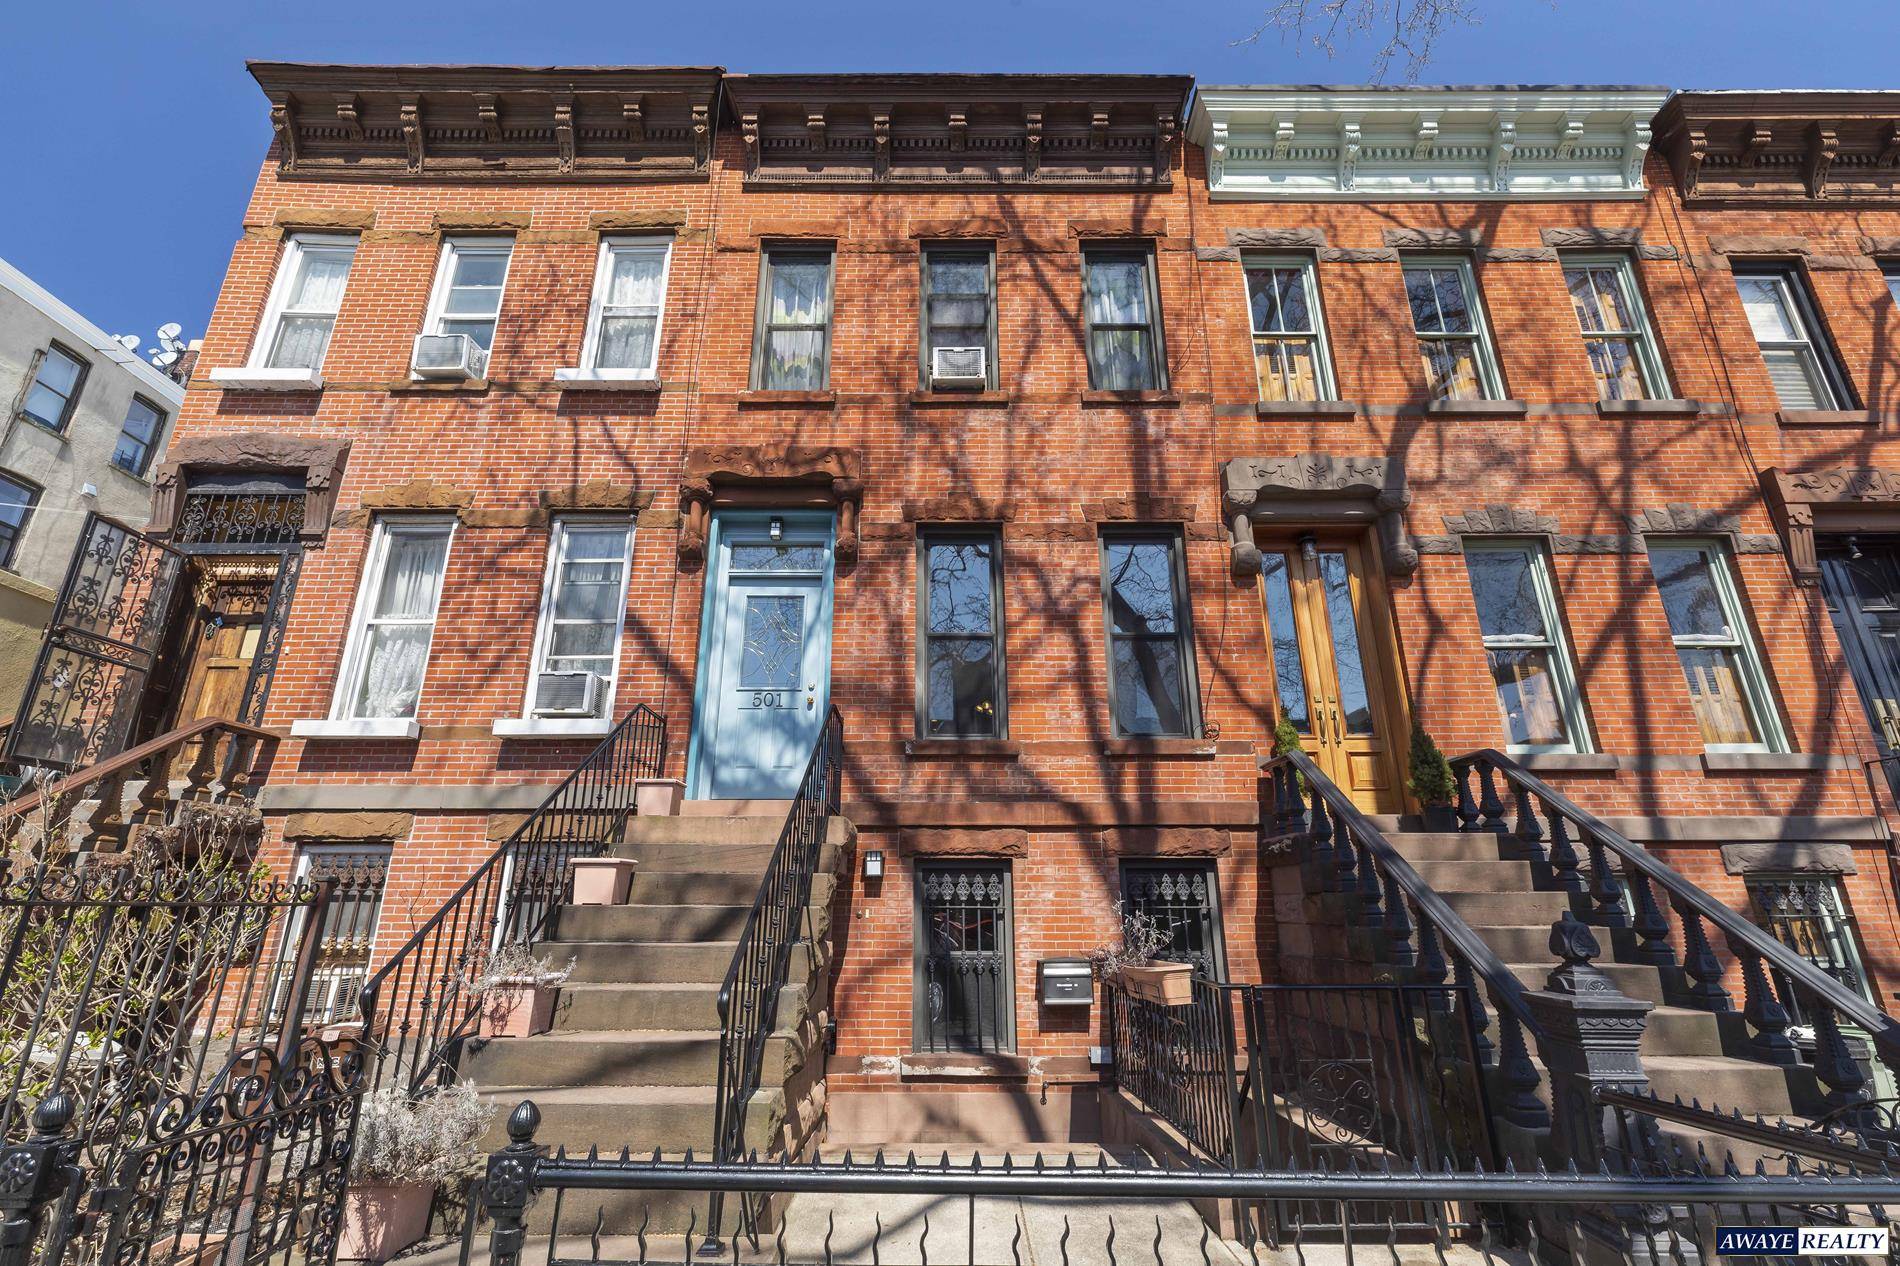 Welcome to TOWNHOUSE on 17thThis outstanding property is located on one of the most coveted wide streets in the border of South Slope and Windsor Terrace.